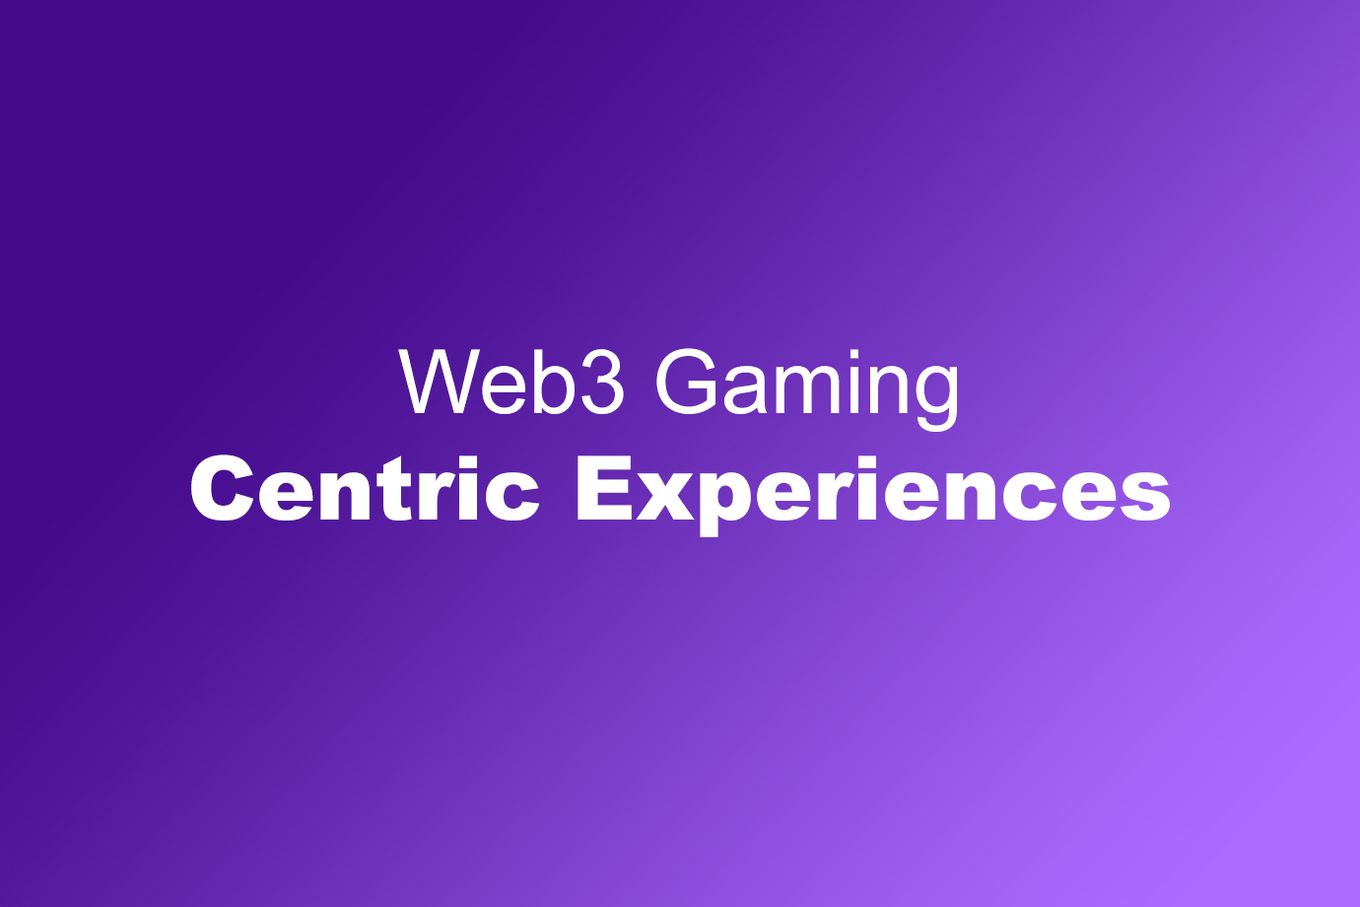 Web3 Games - Centric Experiences